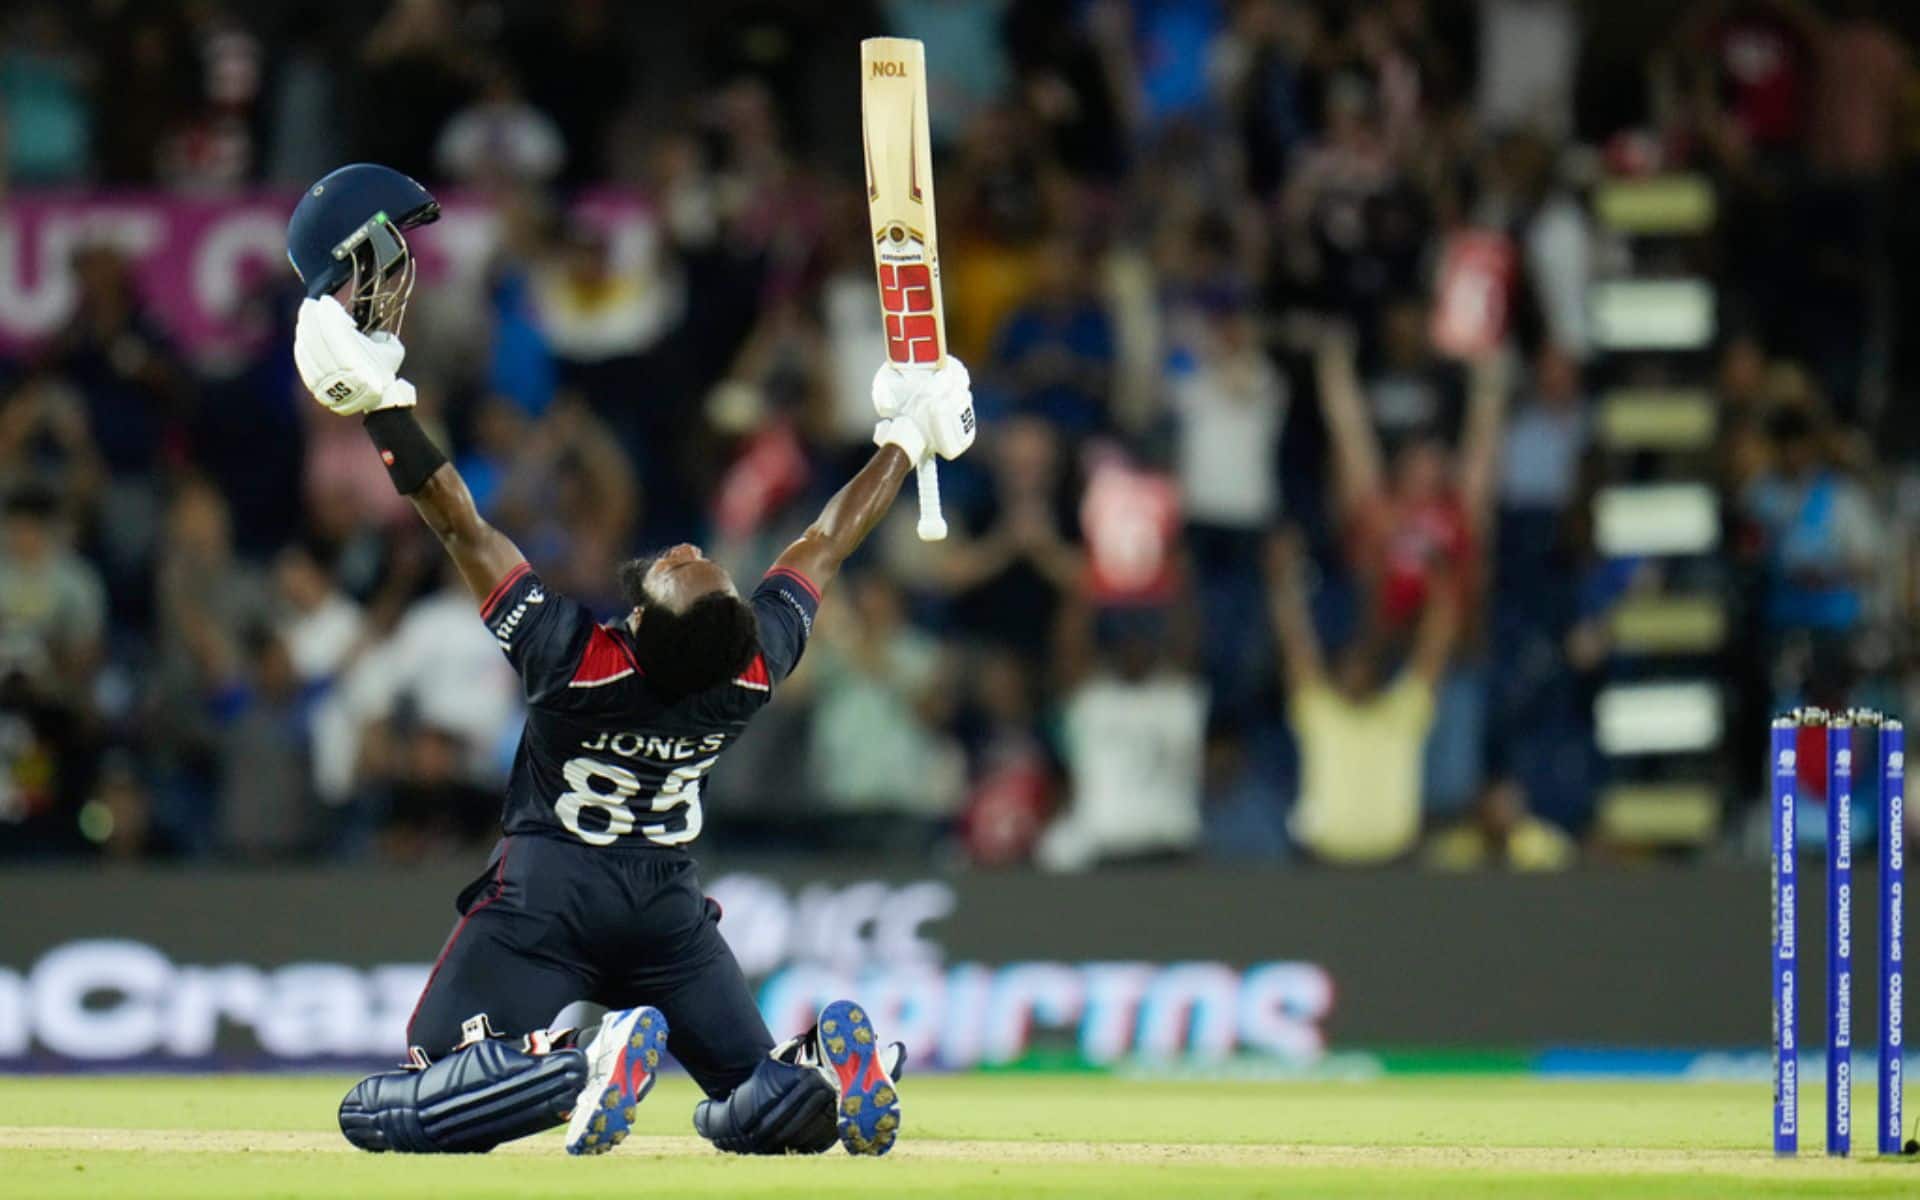 Who Is Aaron Jones Who Scored Record-Setting 94* In T20 World Cup Opener?